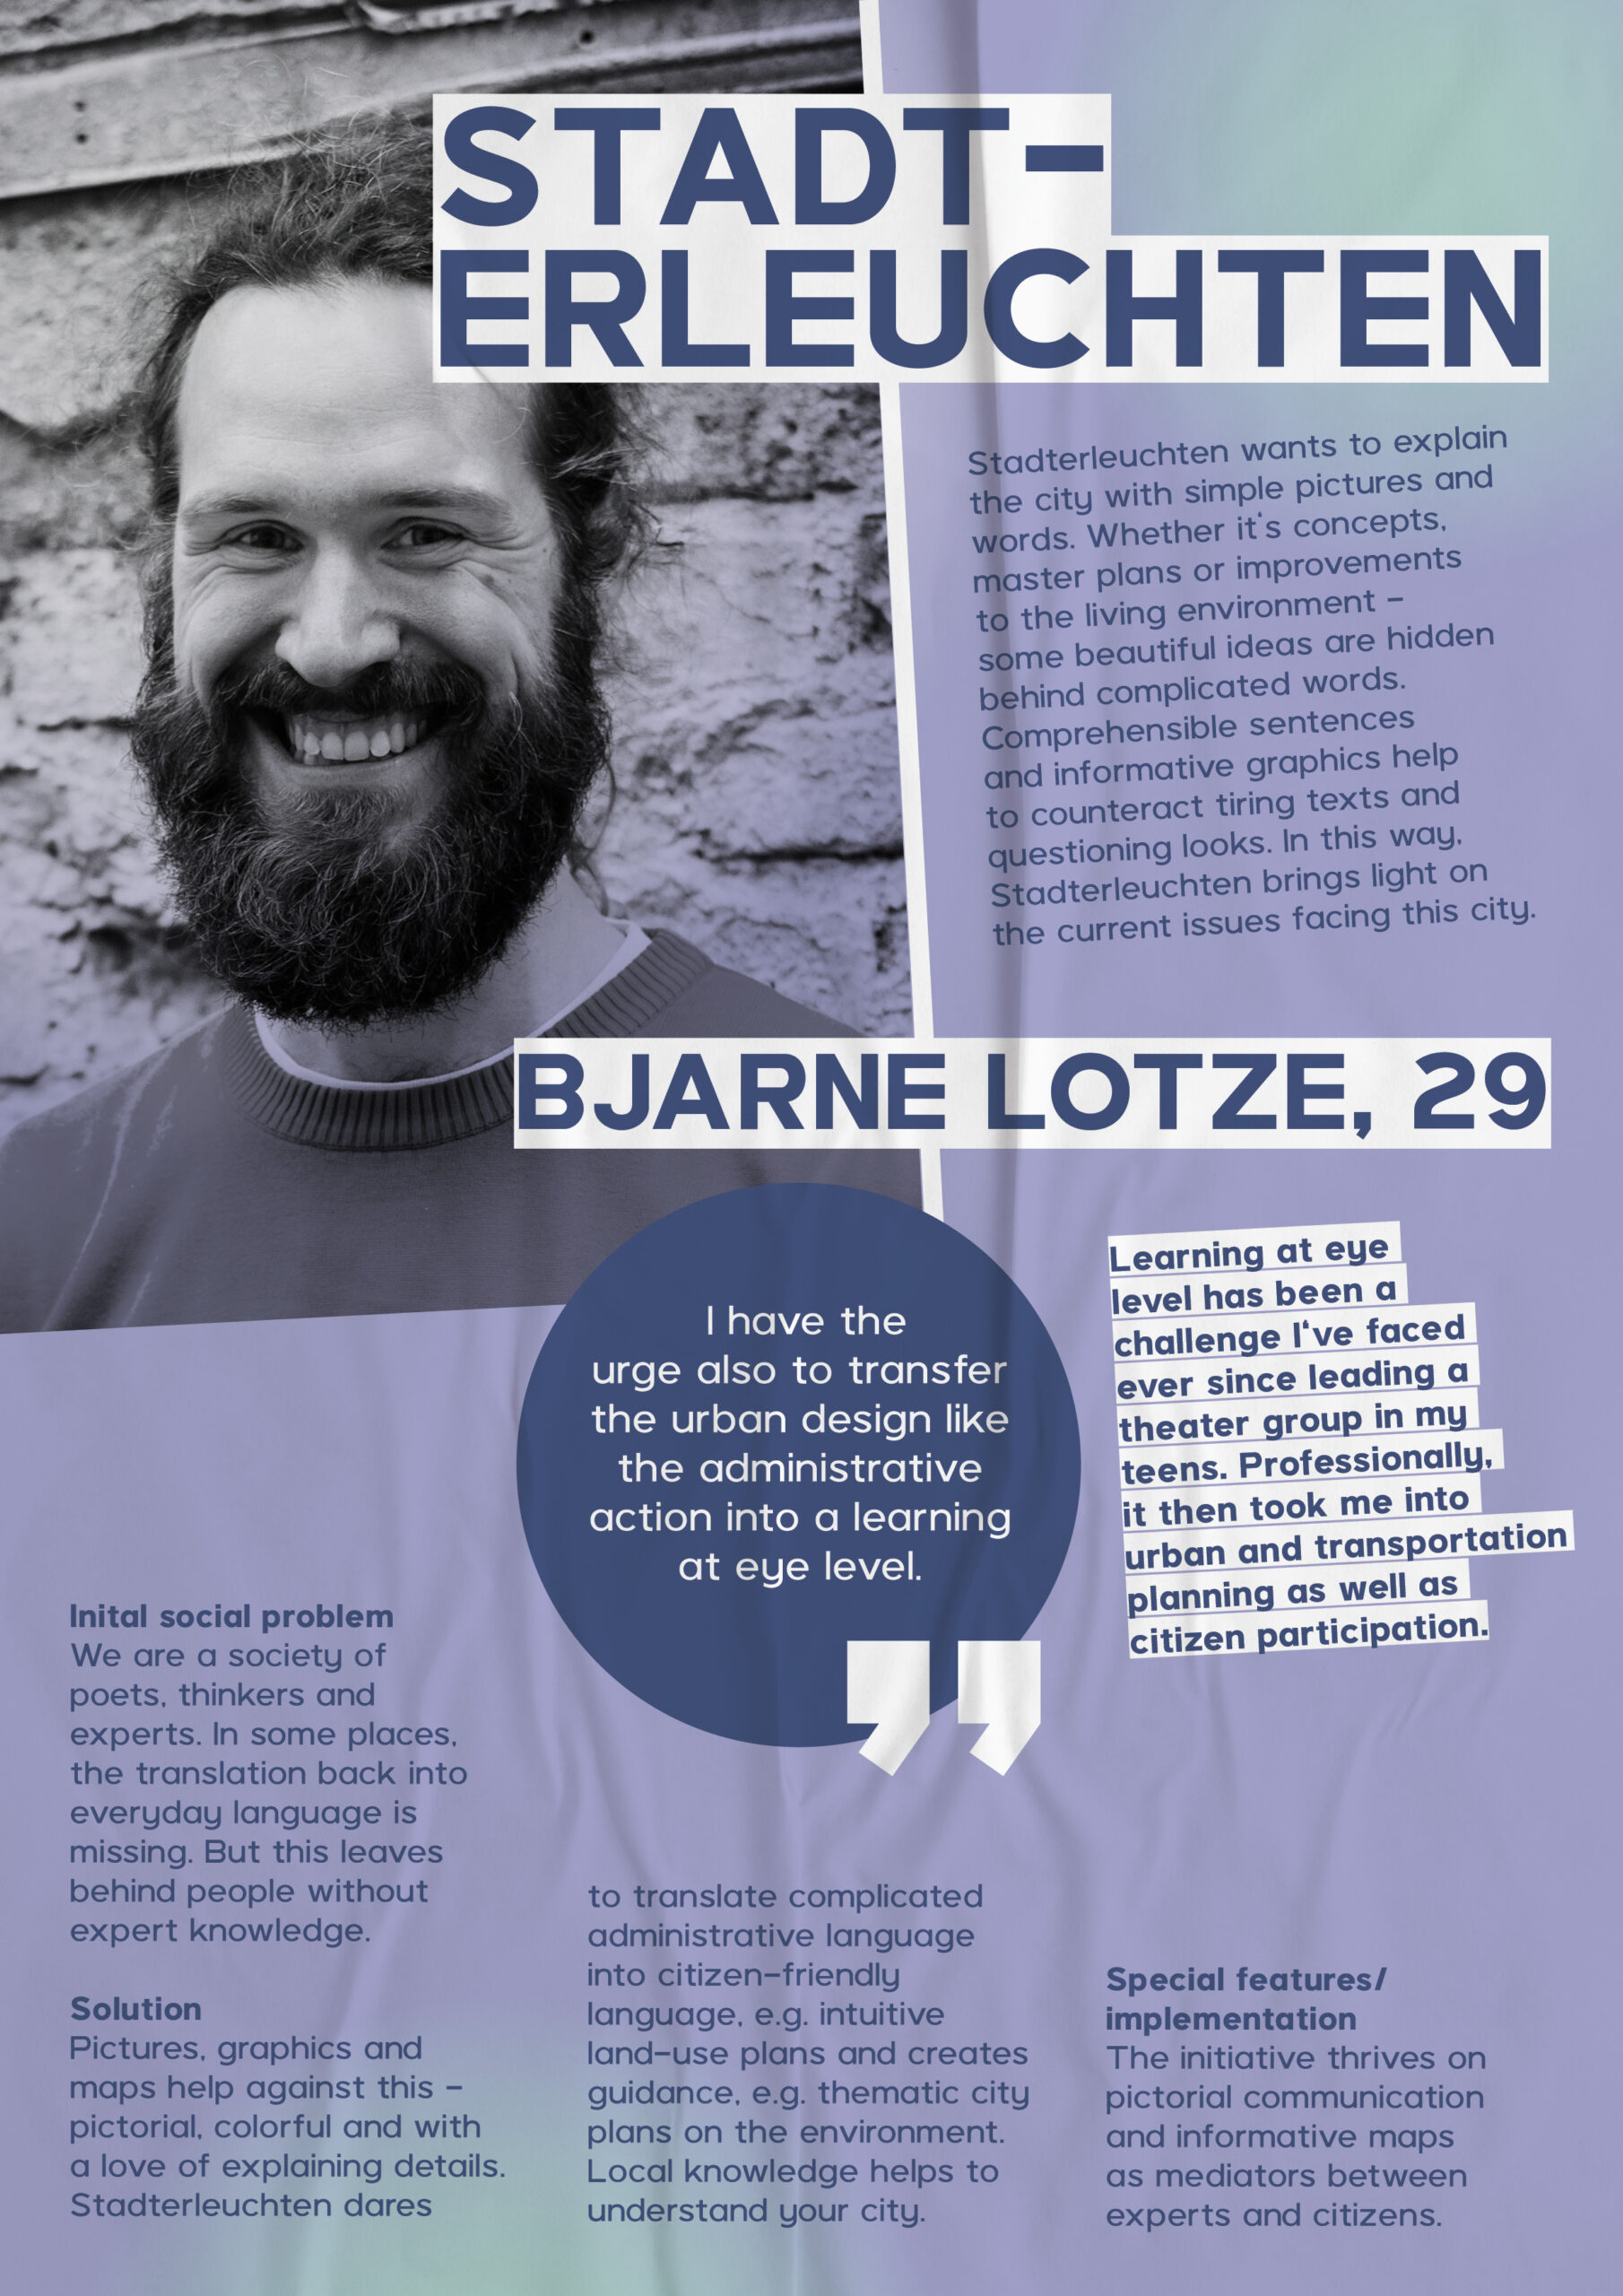 Bjarne Lotze, 29, wants to explain the city with simple images and words with his idea Stadterleuchten.